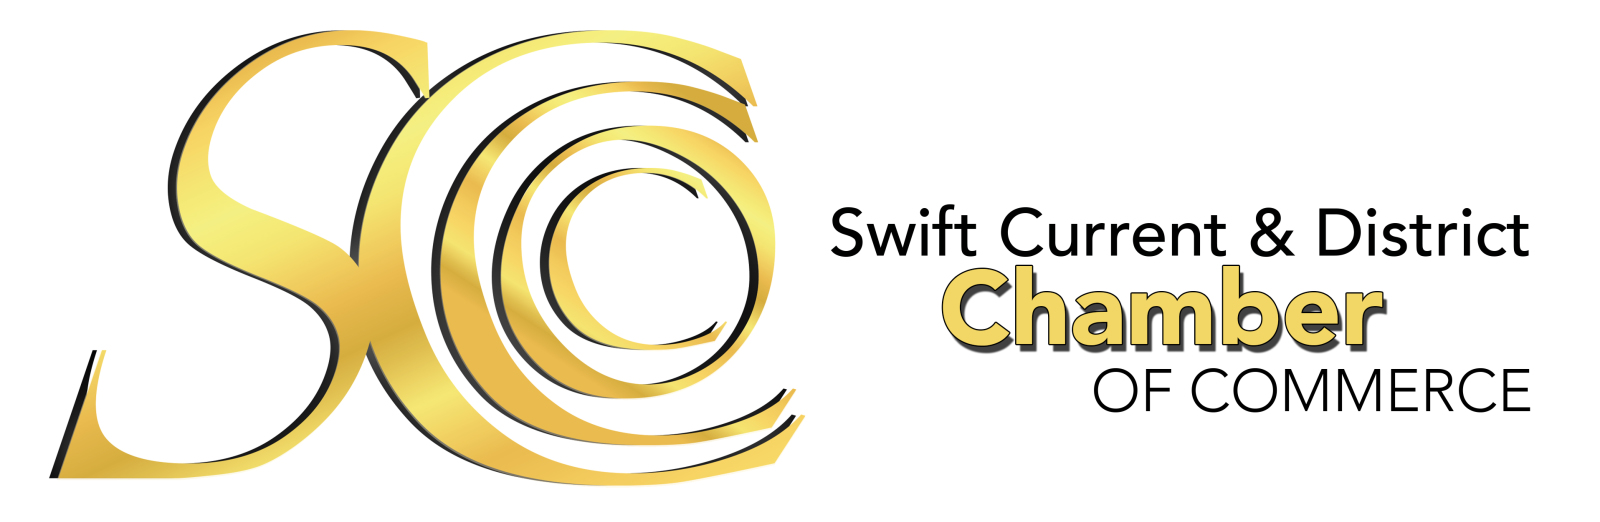 Swift Current & District Chamber of Commerce